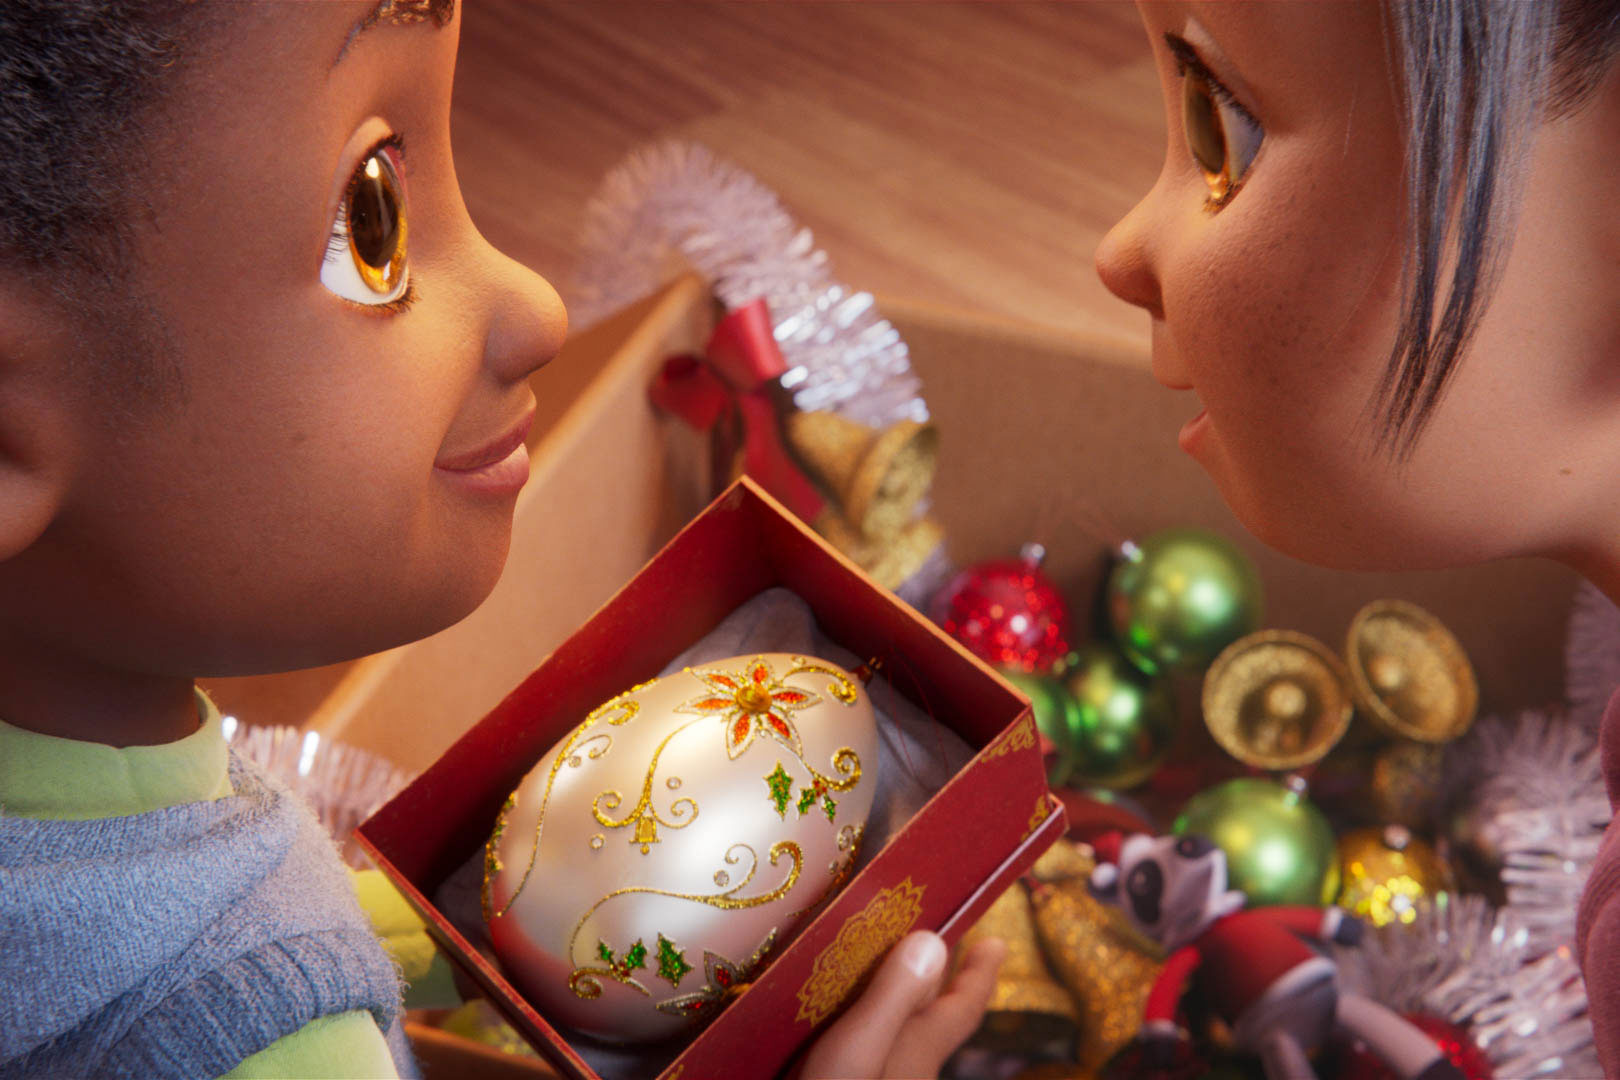 Chick-fil-A continues its annual holiday tradition with a new animated short film at EvergreenHills.com that inspires viewers to turn the unexpected into something wonderful.